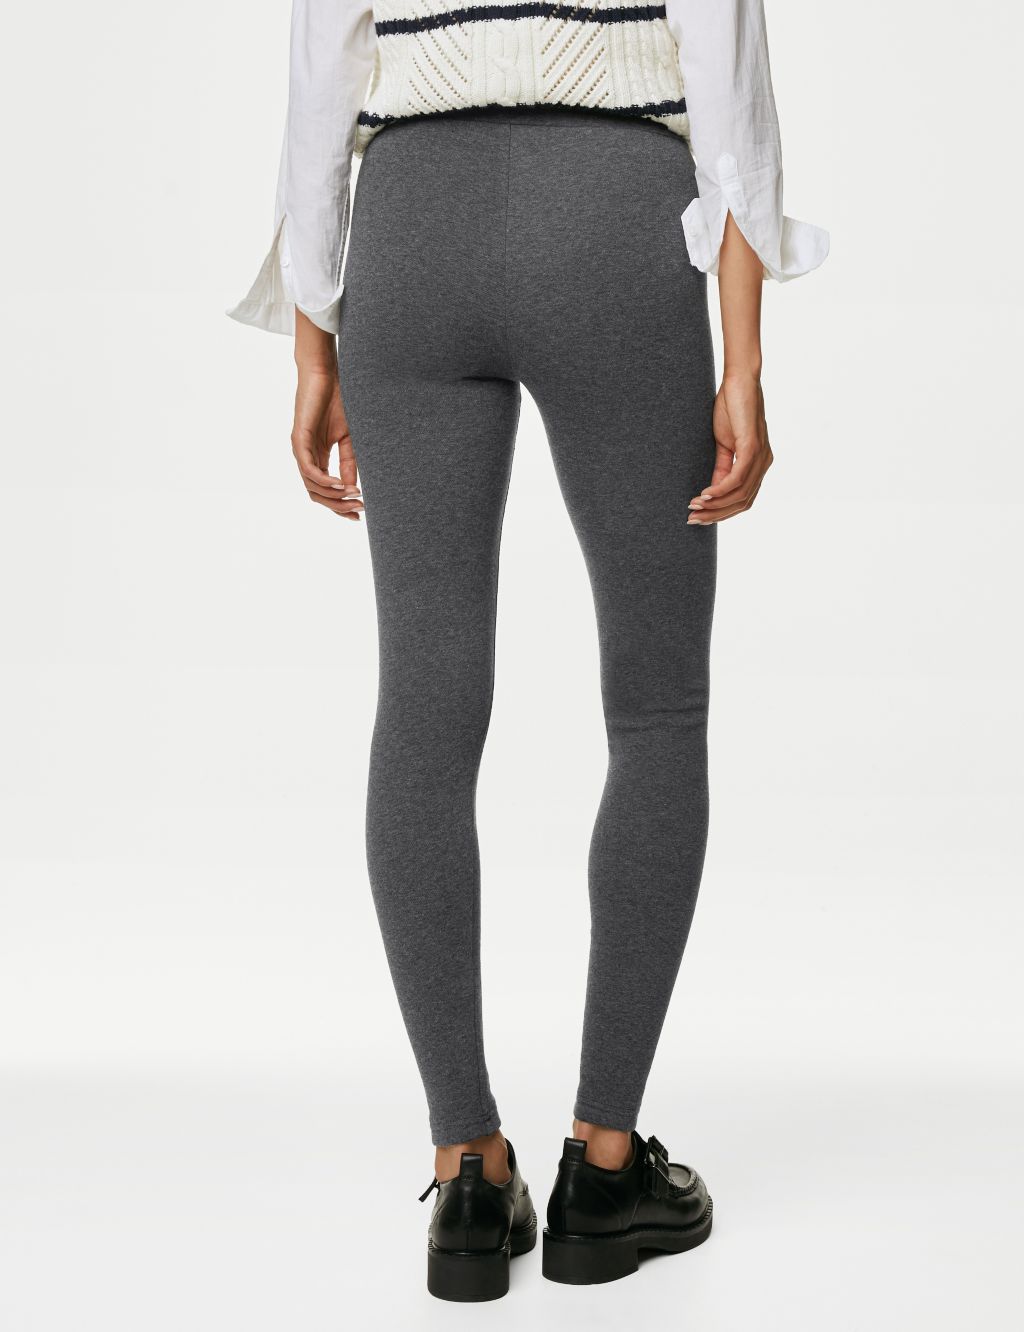 Thermal High Waisted Leggings image 5